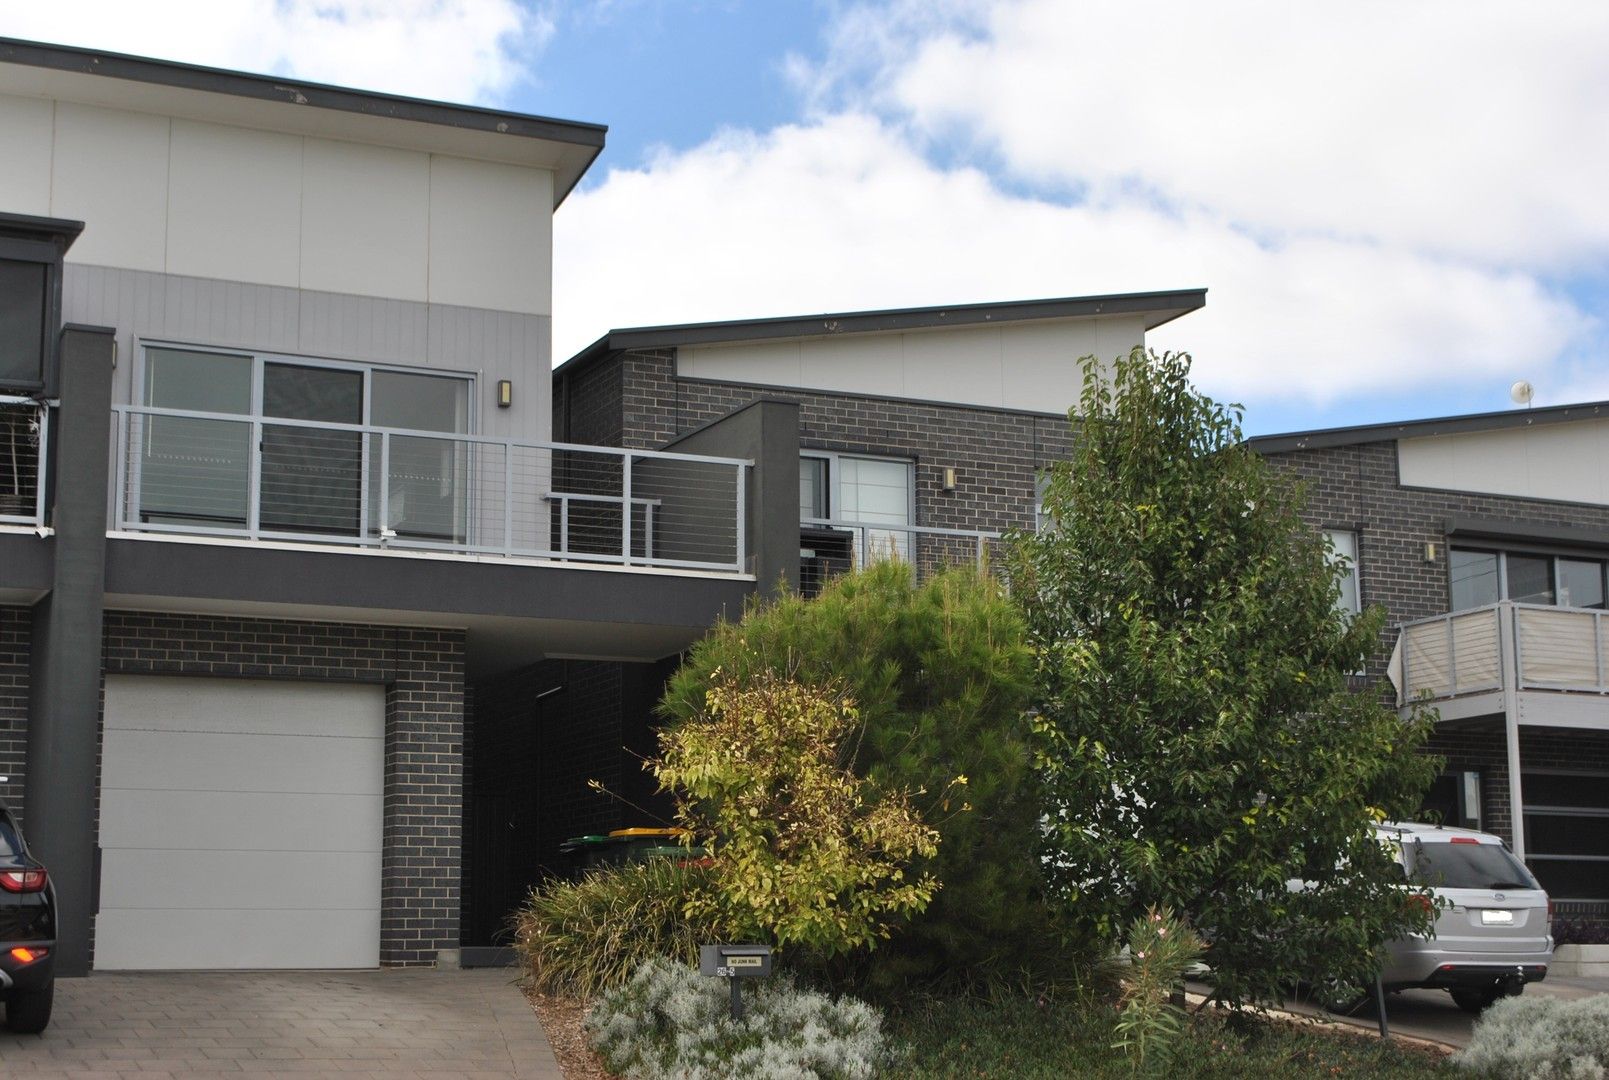 3 bedrooms Townhouse in 5/26 Roy Terrace CHRISTIES BEACH SA, 5165